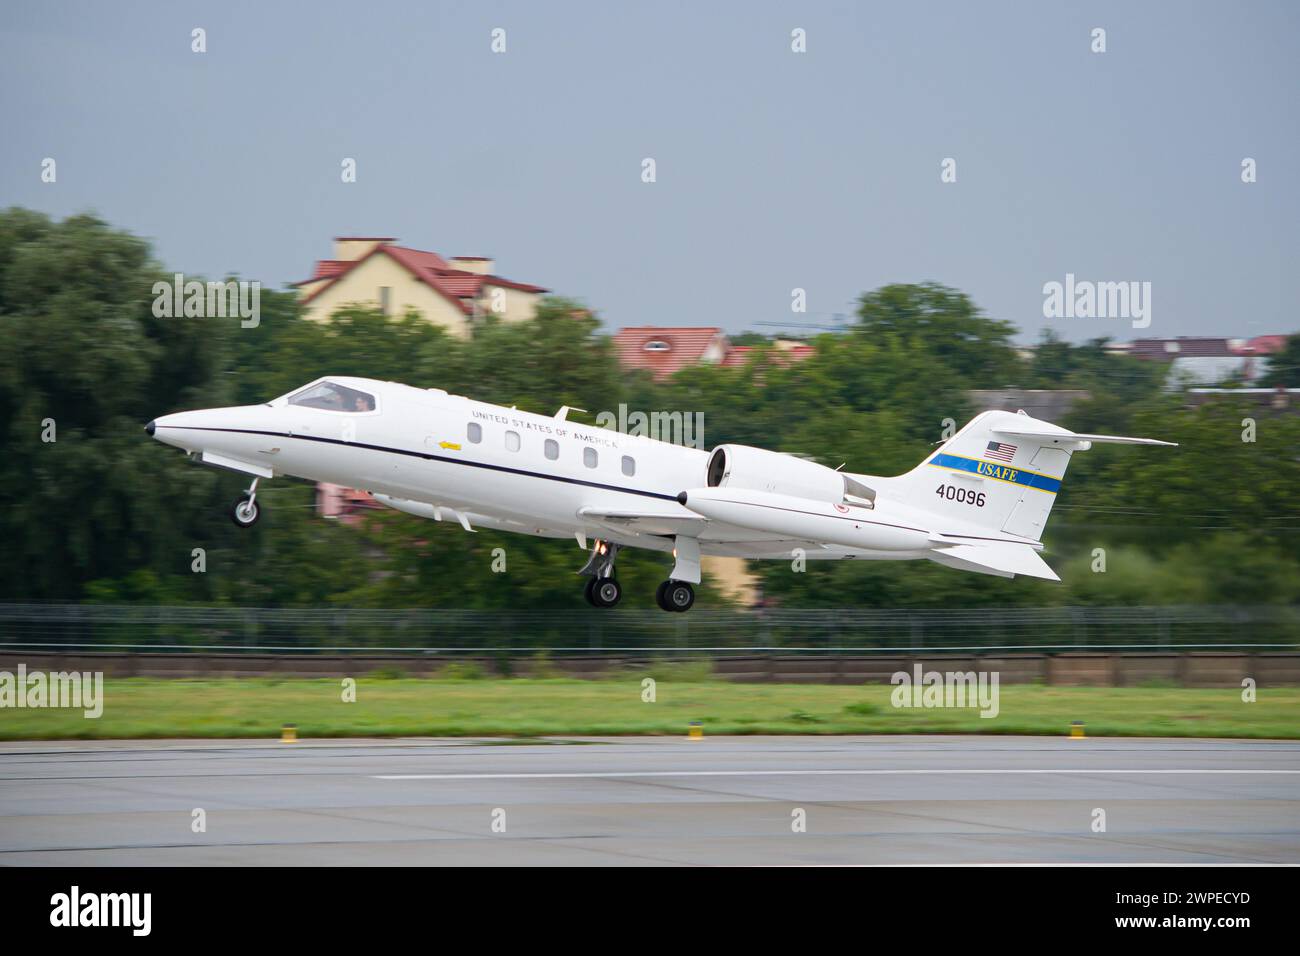 United States Air Force in Europe Learjet C-21A (Learjet 35A) taking off from Lviv Stock Photo